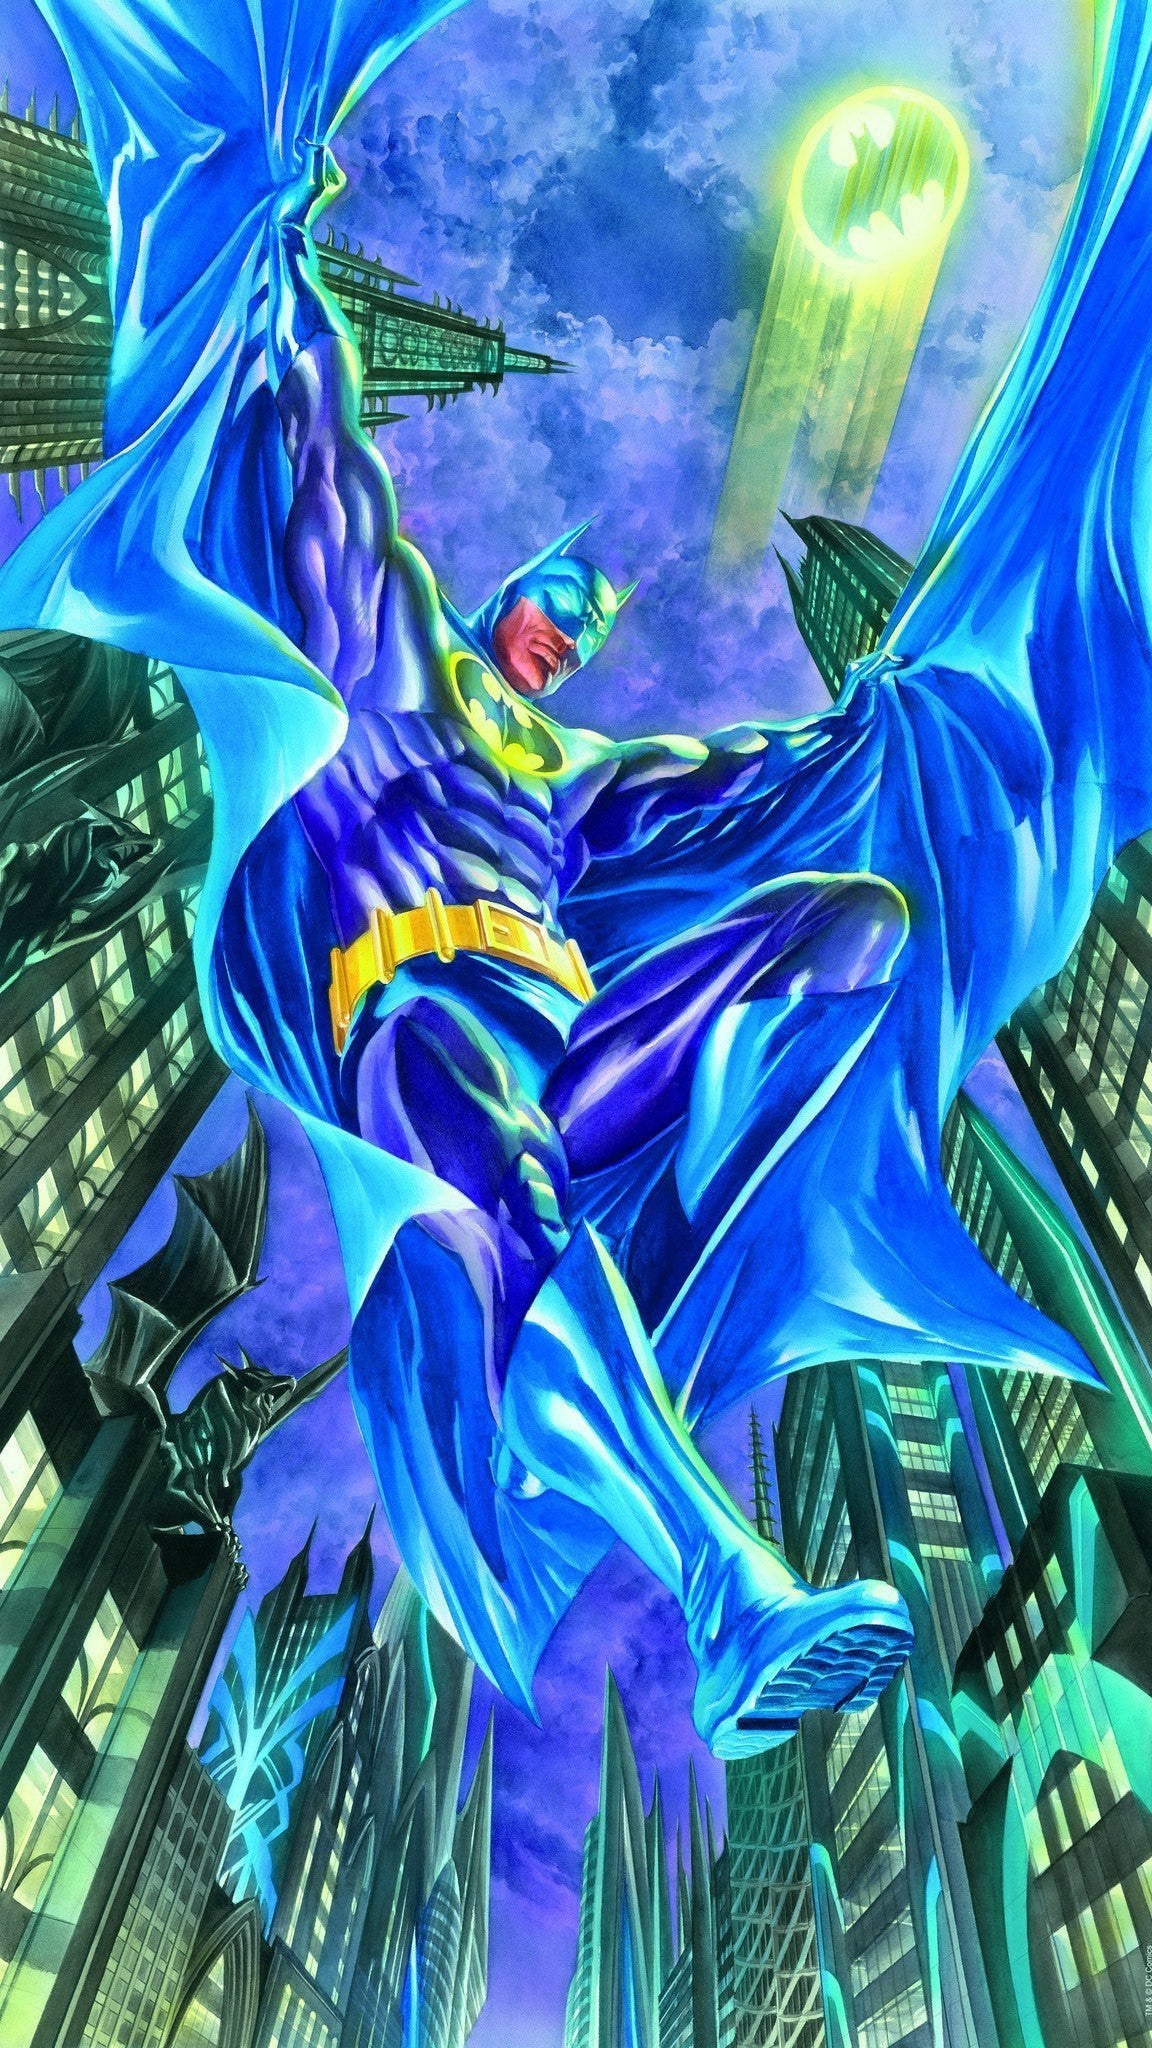 Batman: Dark Knight Detective - Edition - SOLD OUT Alex Ross Batman: Dark Knight Detective - Edition - SOLD OUT